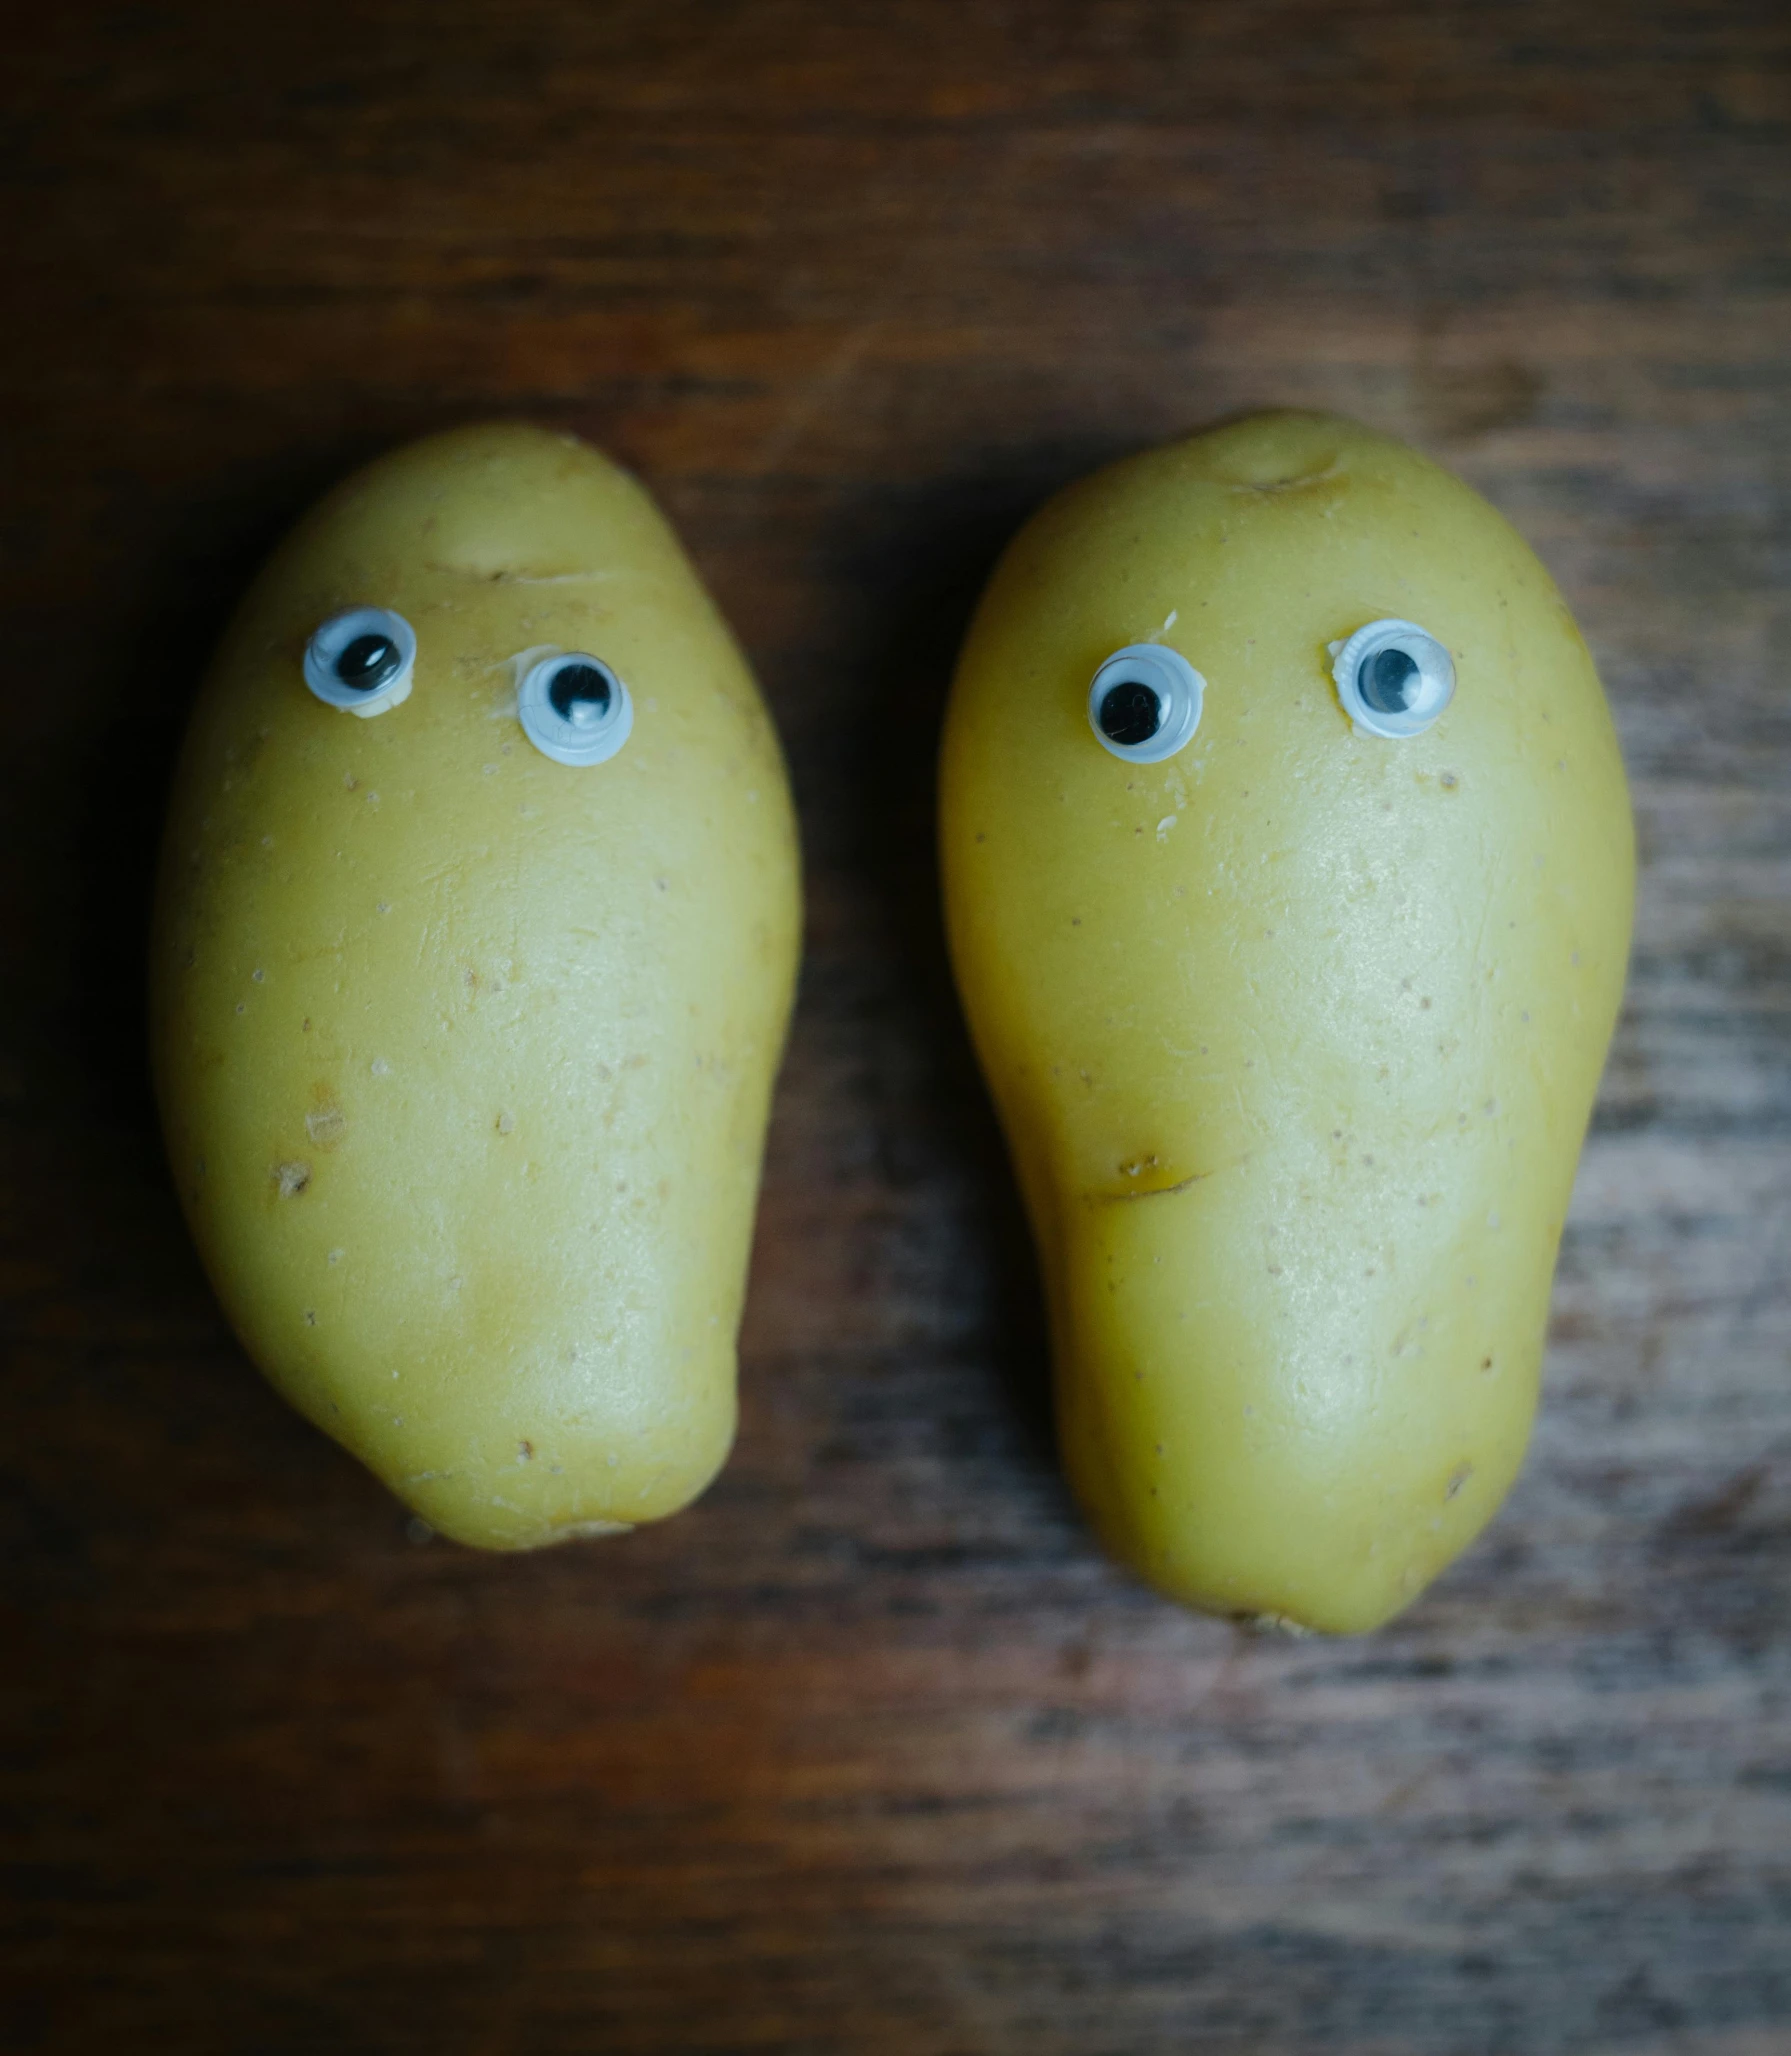 a couple of potatoes sitting on top of a wooden table, a cartoon, unsplash, purism, eyes are yellow, creepy macro photo, ignant, 🐿🍸🍋